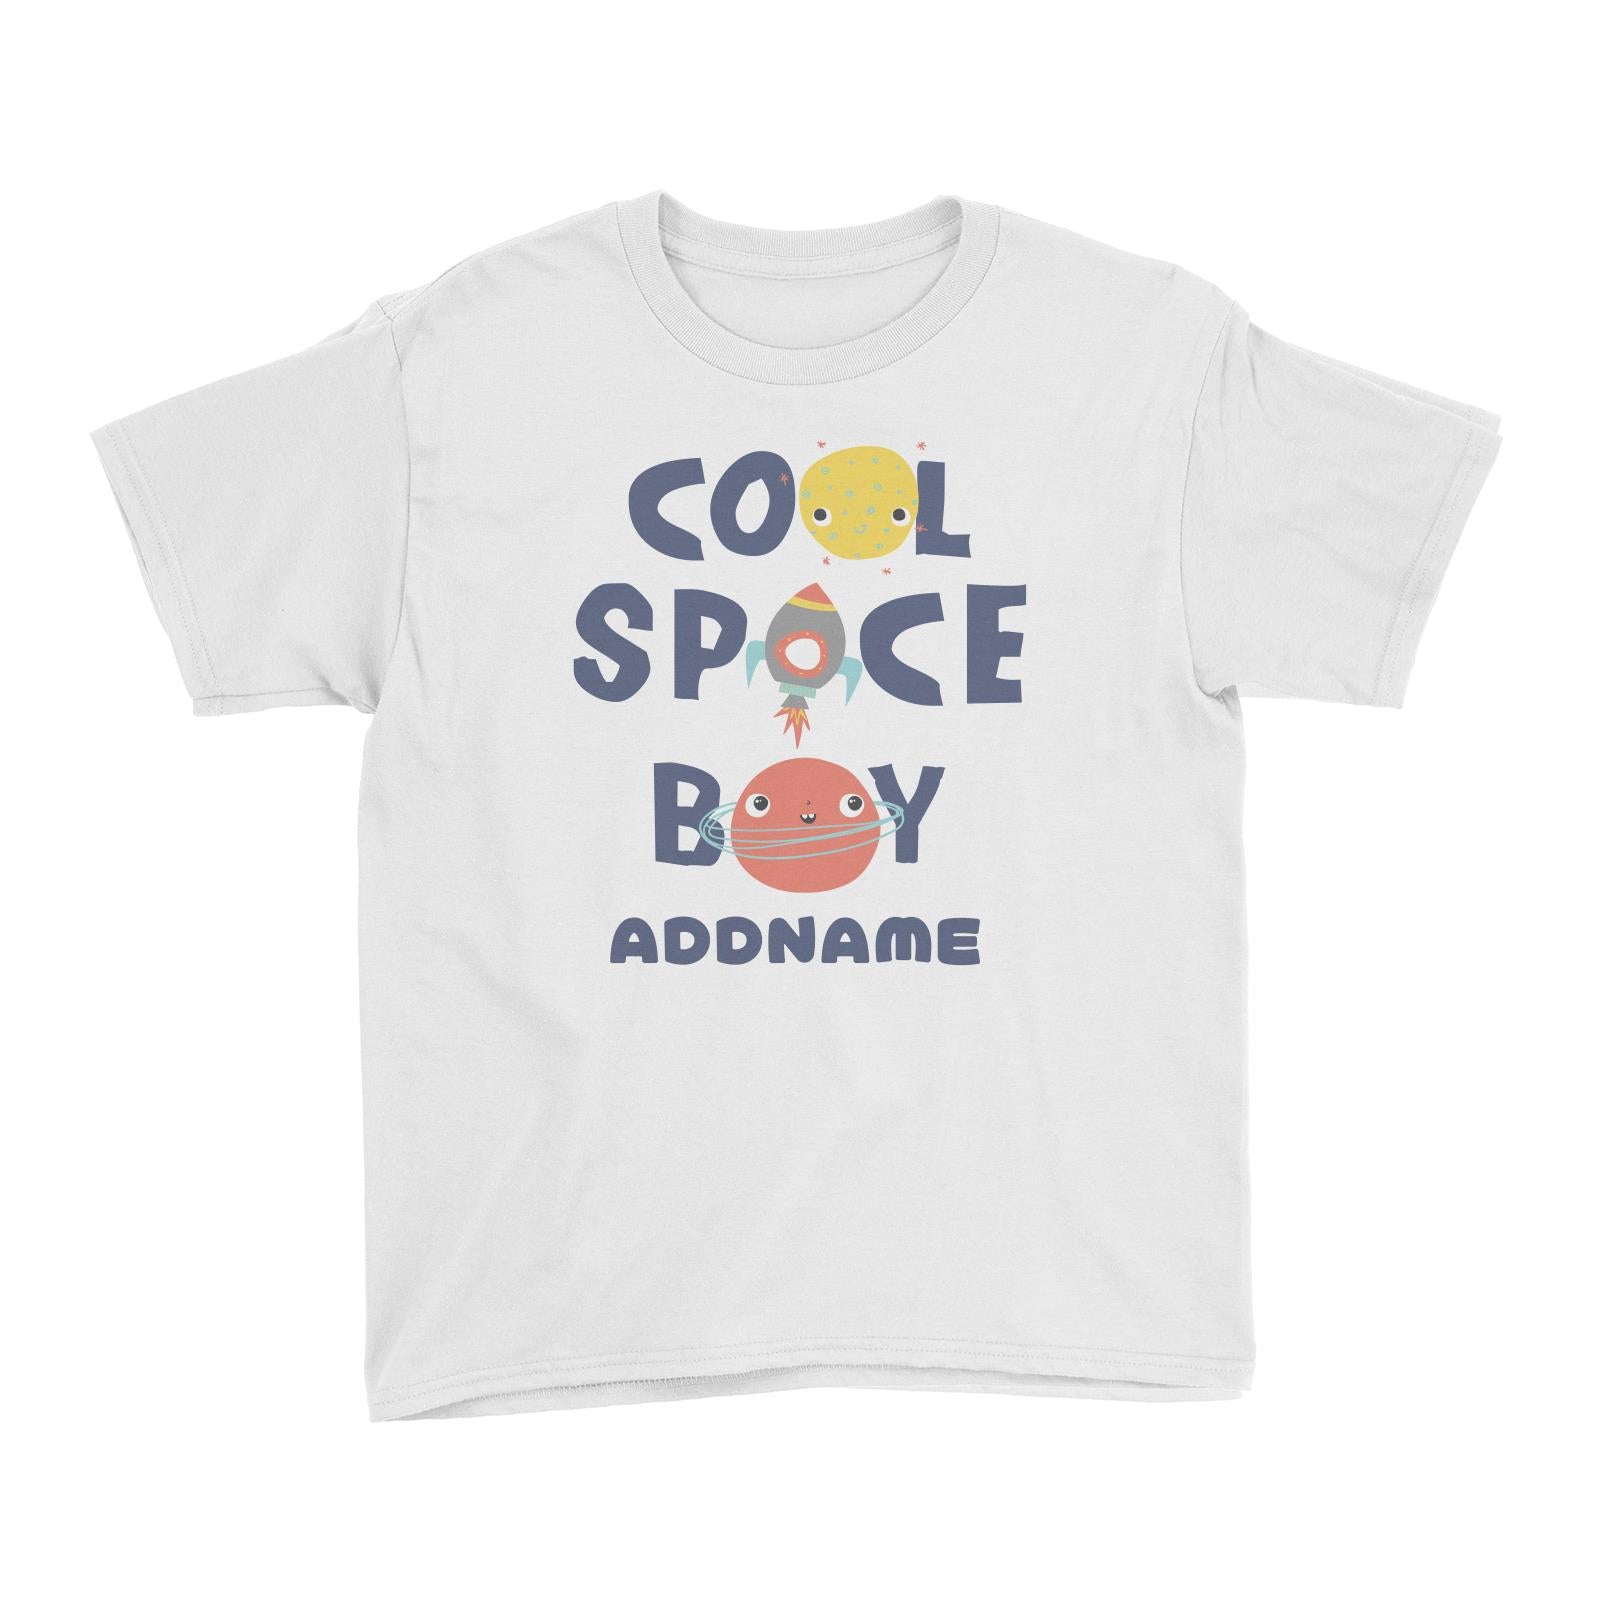 Cool Space Boy Addname White Kid's T-Shirt